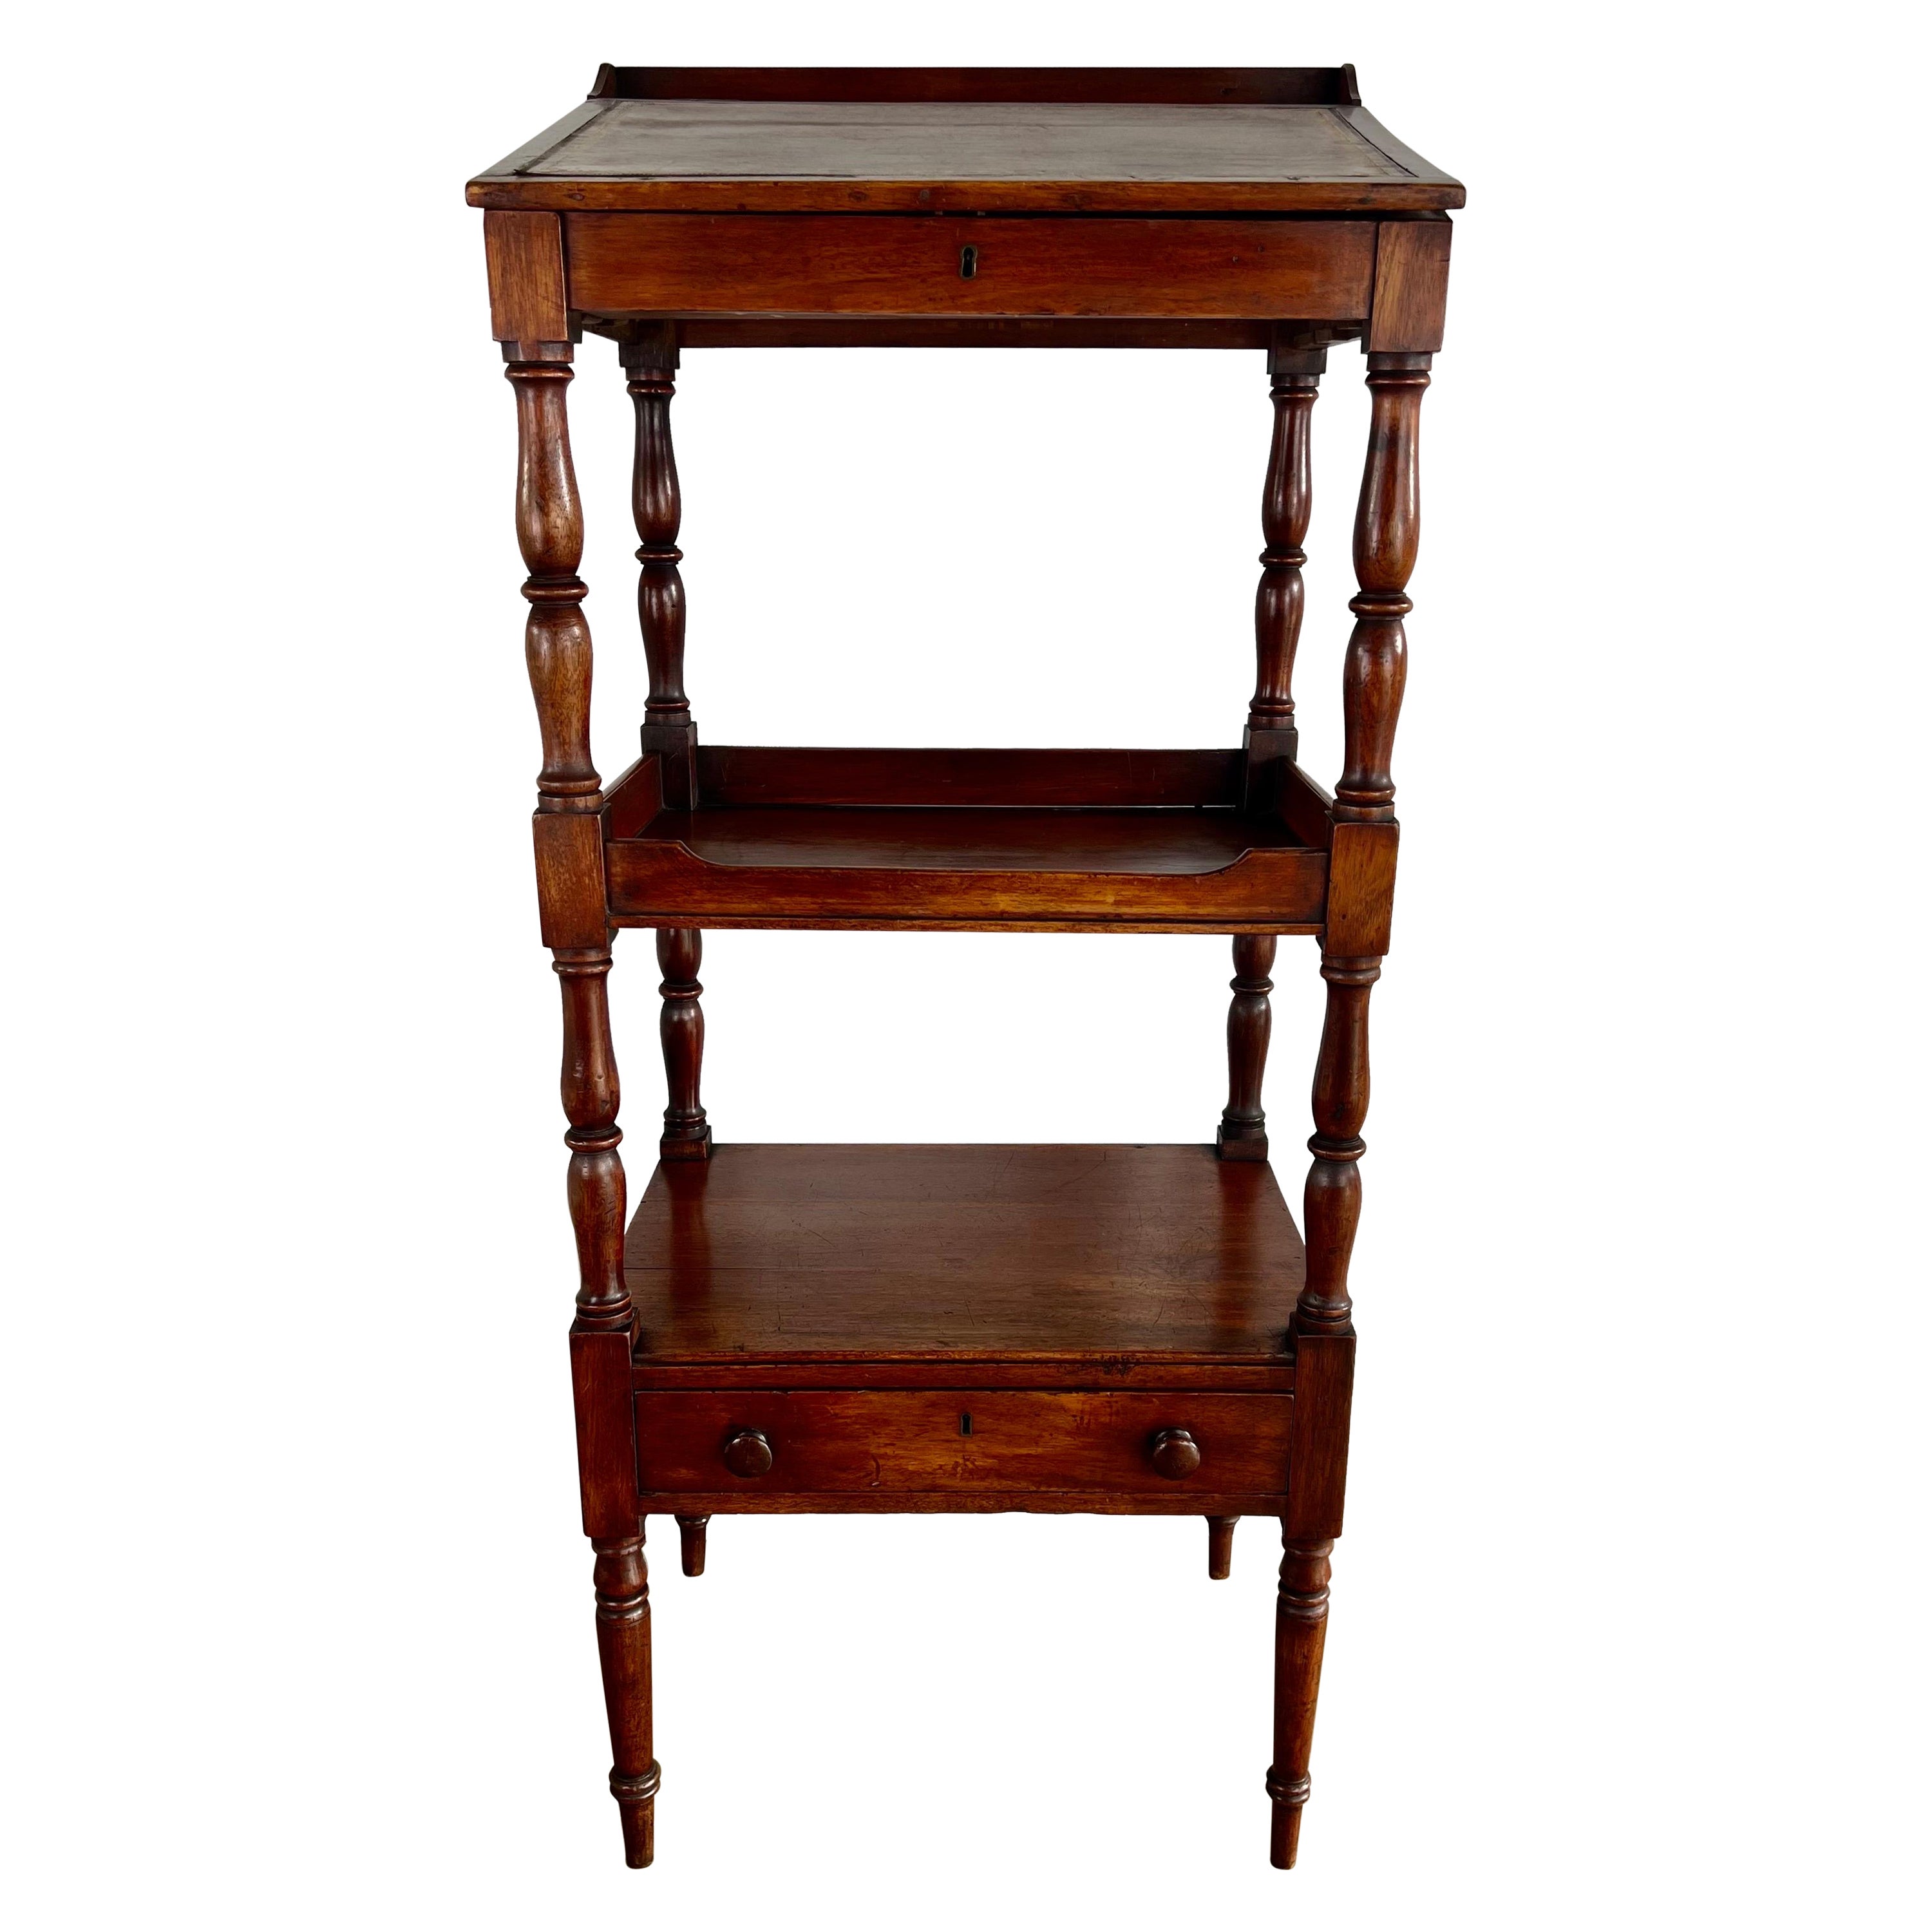 Three Tiered Mahogany Leather Embossed Lectern